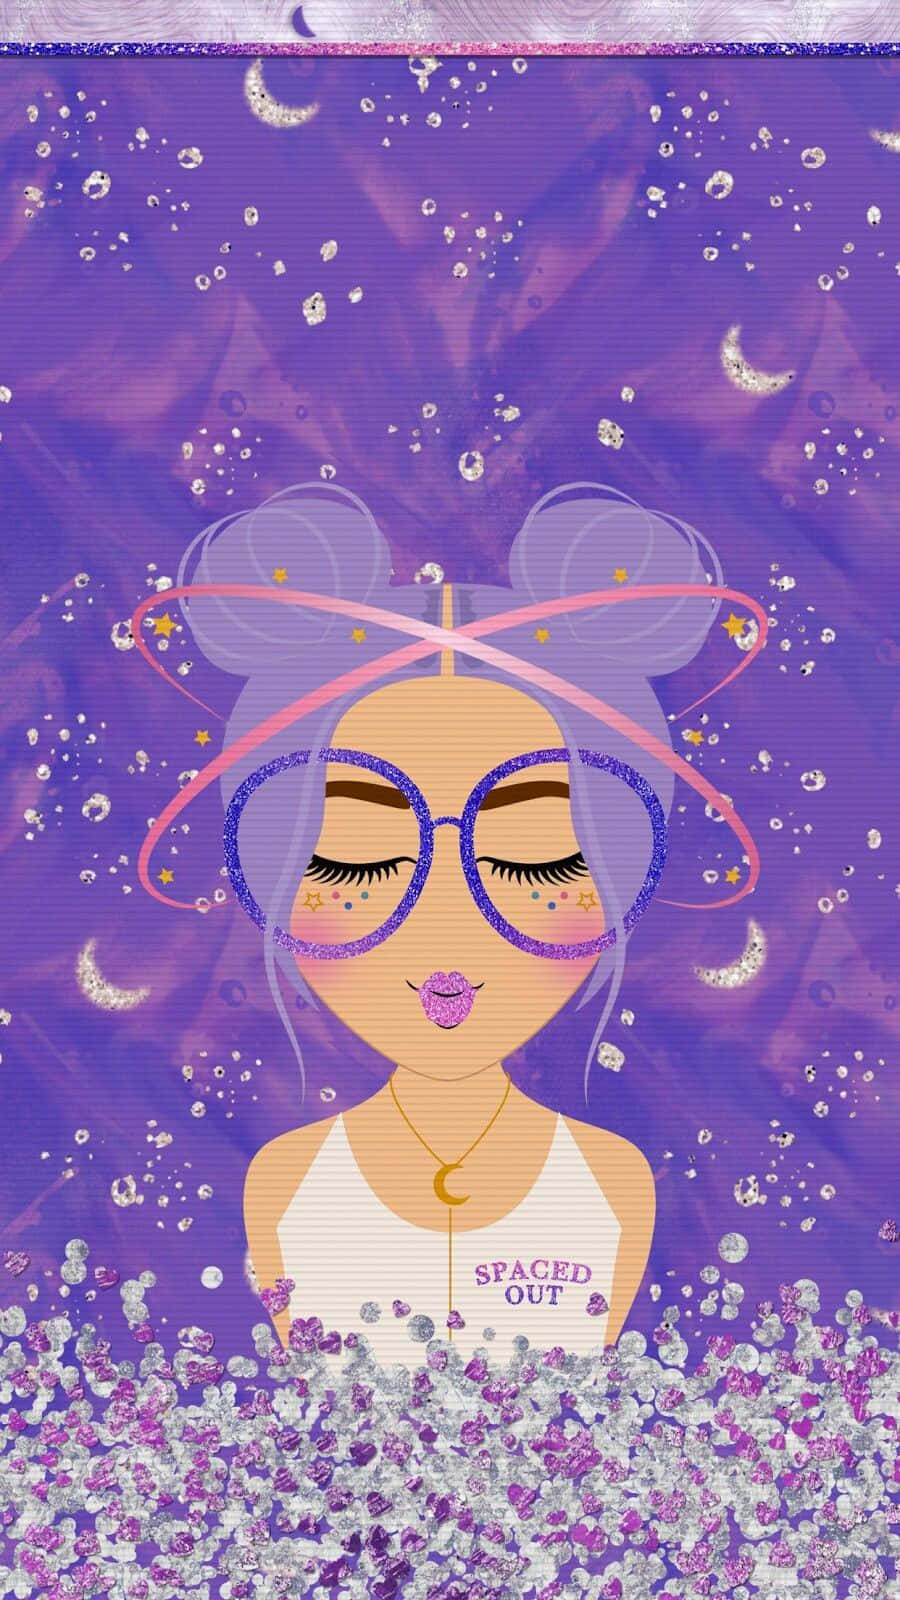 Spaced Out Glitter Girl Illustration Wallpaper